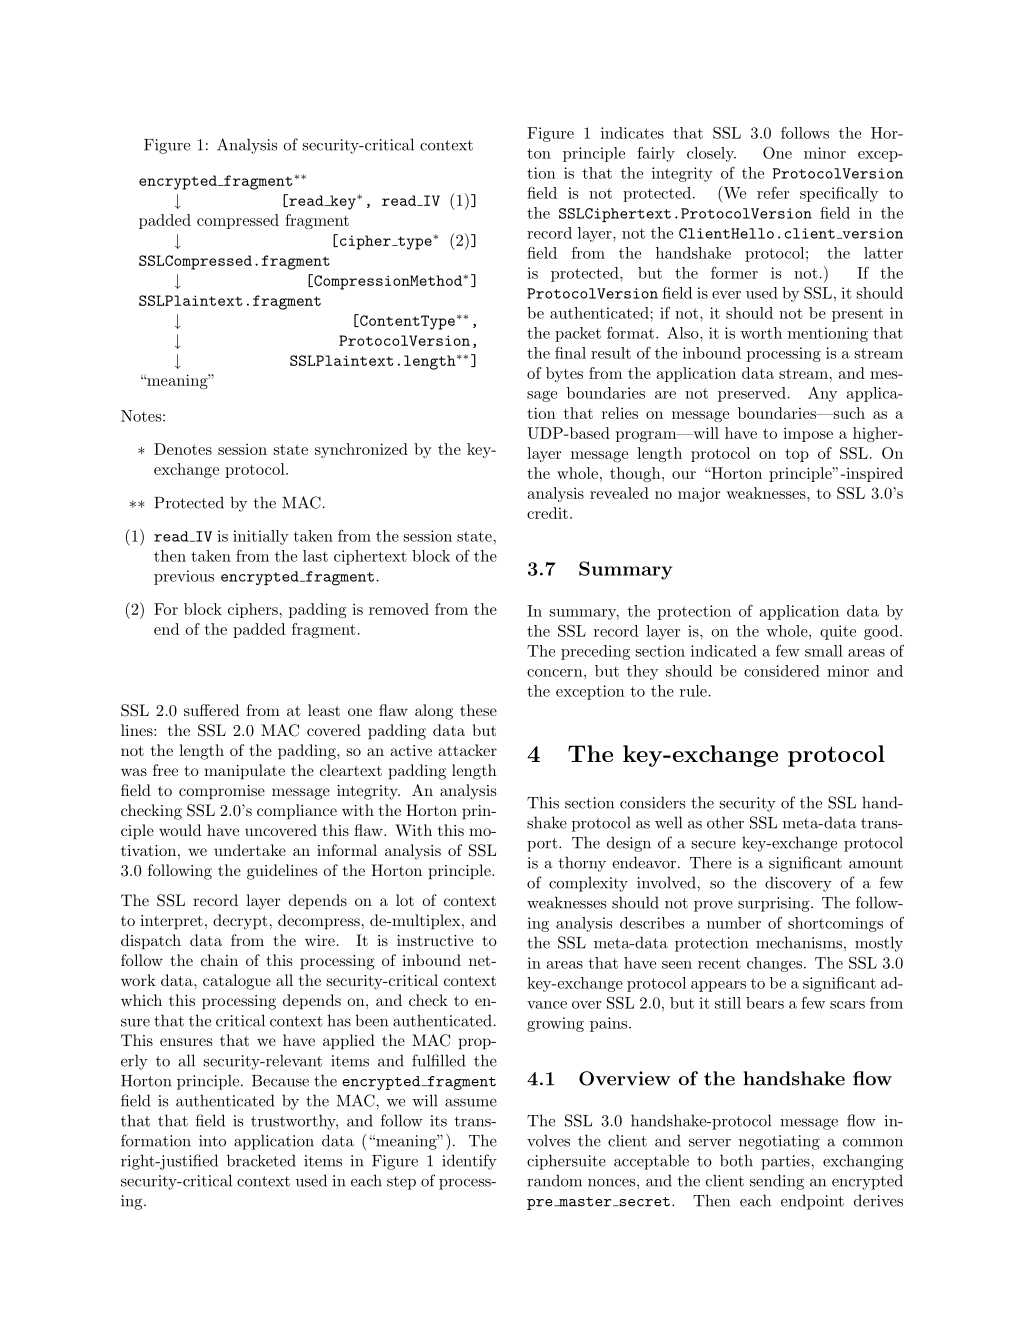 page 5